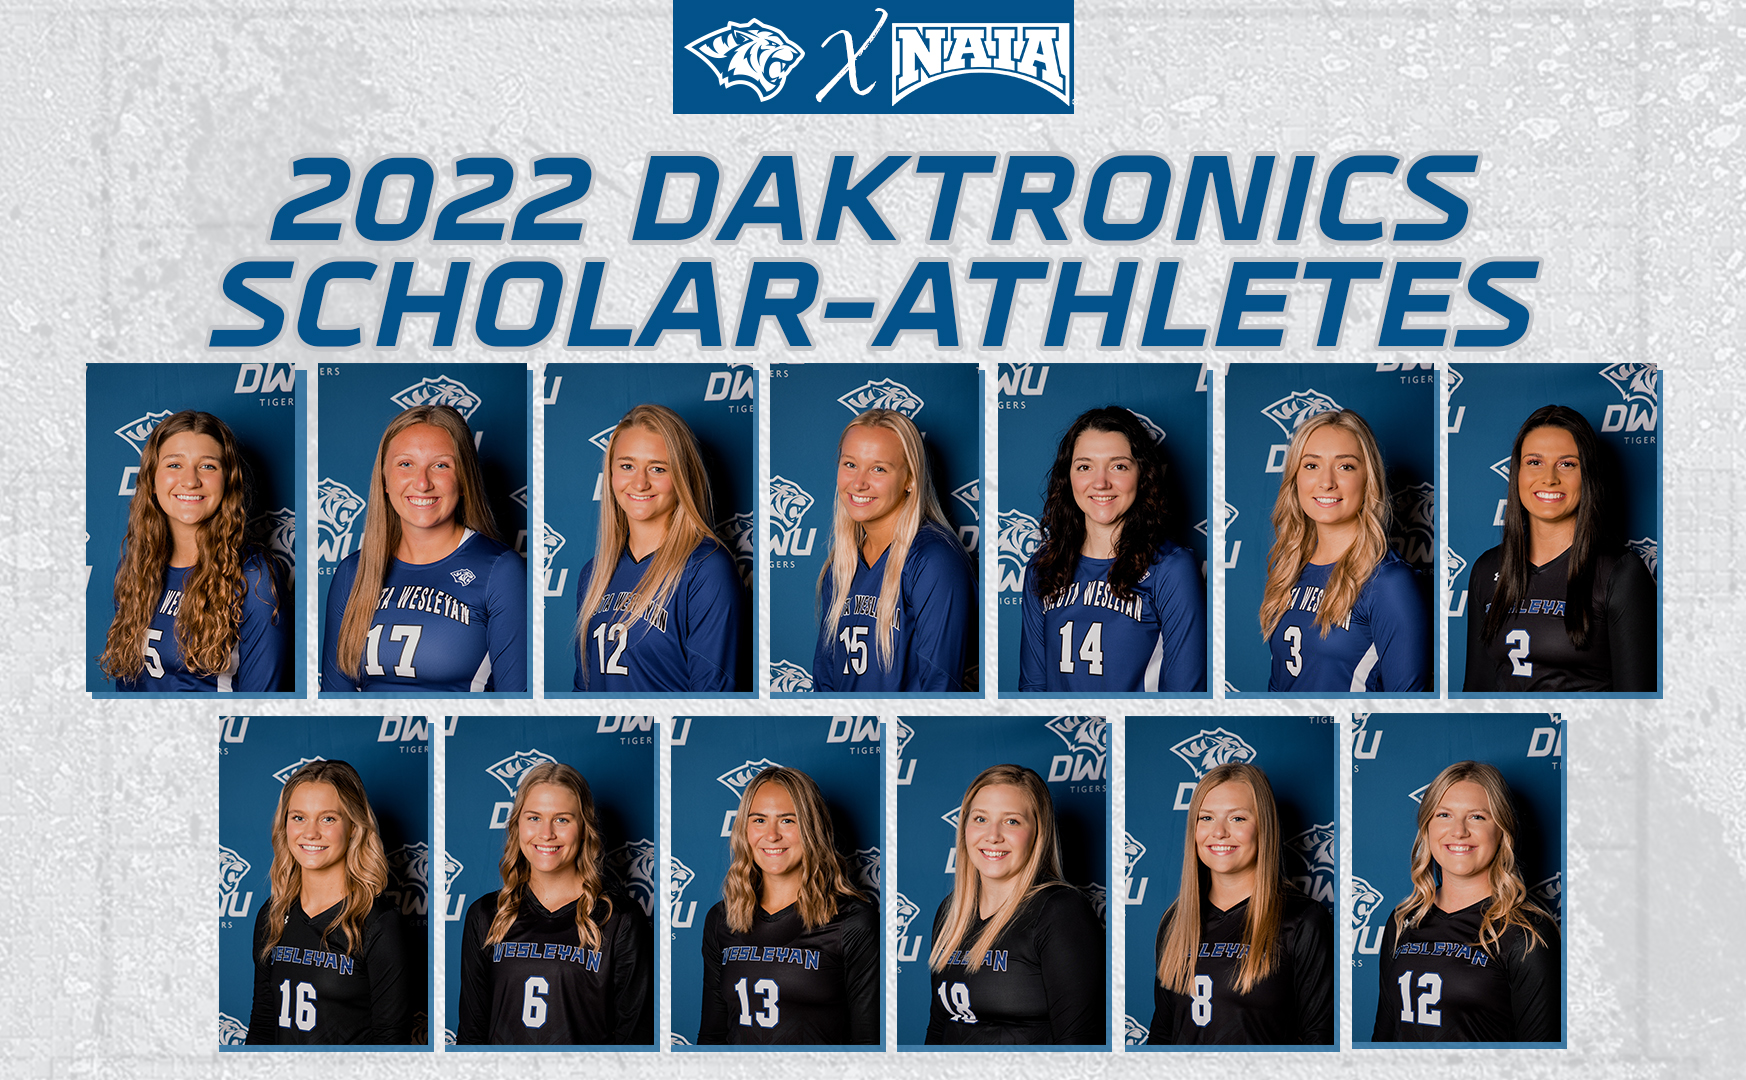 13 TIGER VOLLEYBALL STUDENT-ATHLETES SELECTED TO THE NAIA DAKTRONICS SCHOLAR-ATHLETE LIST